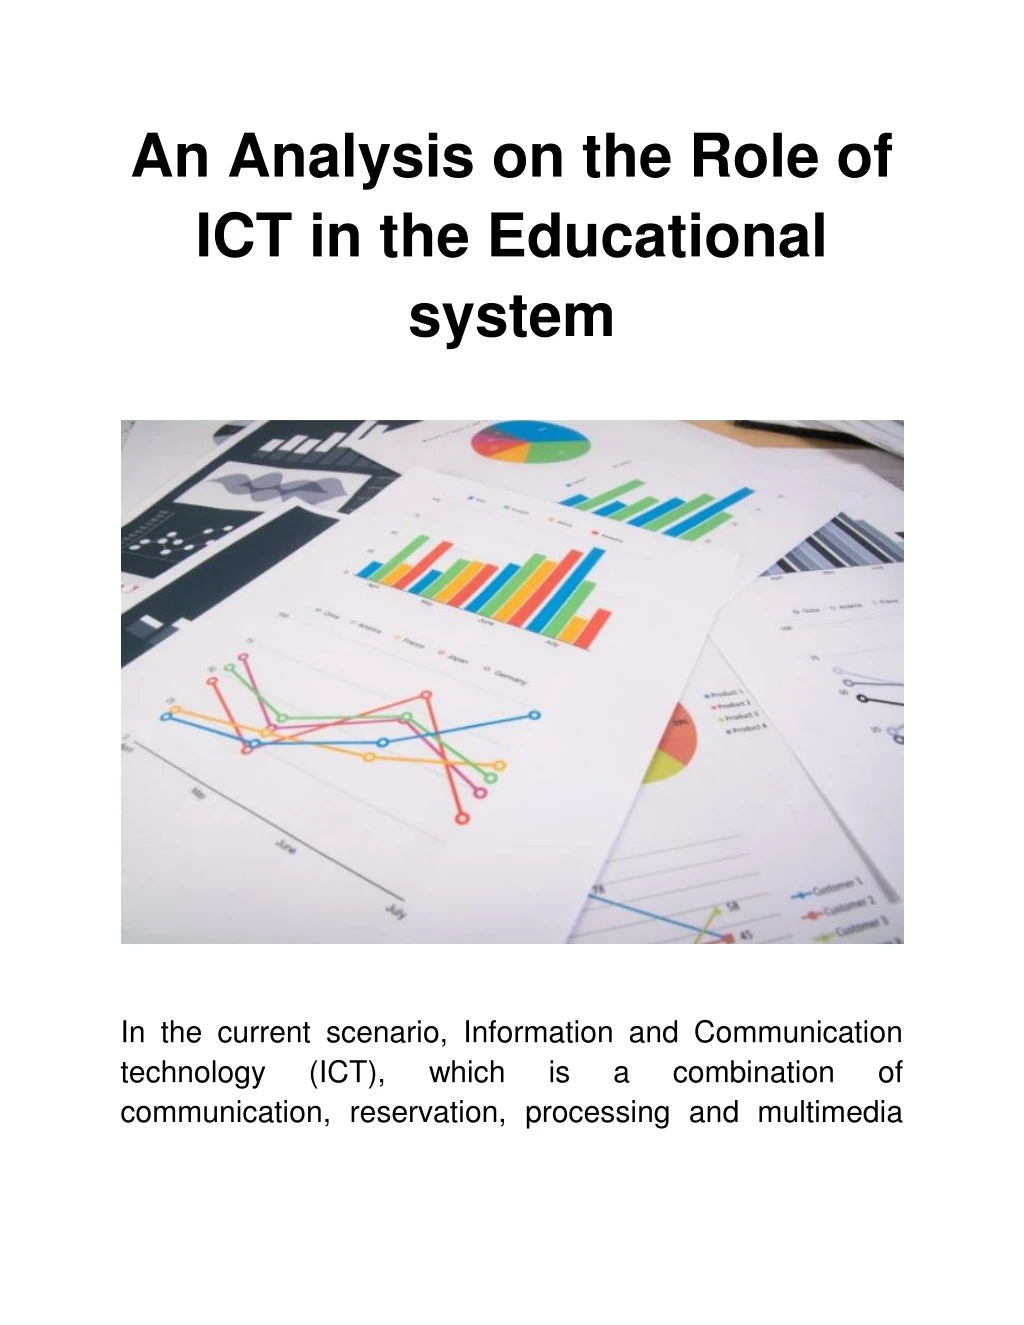 an analysis on the role of ict in the educational